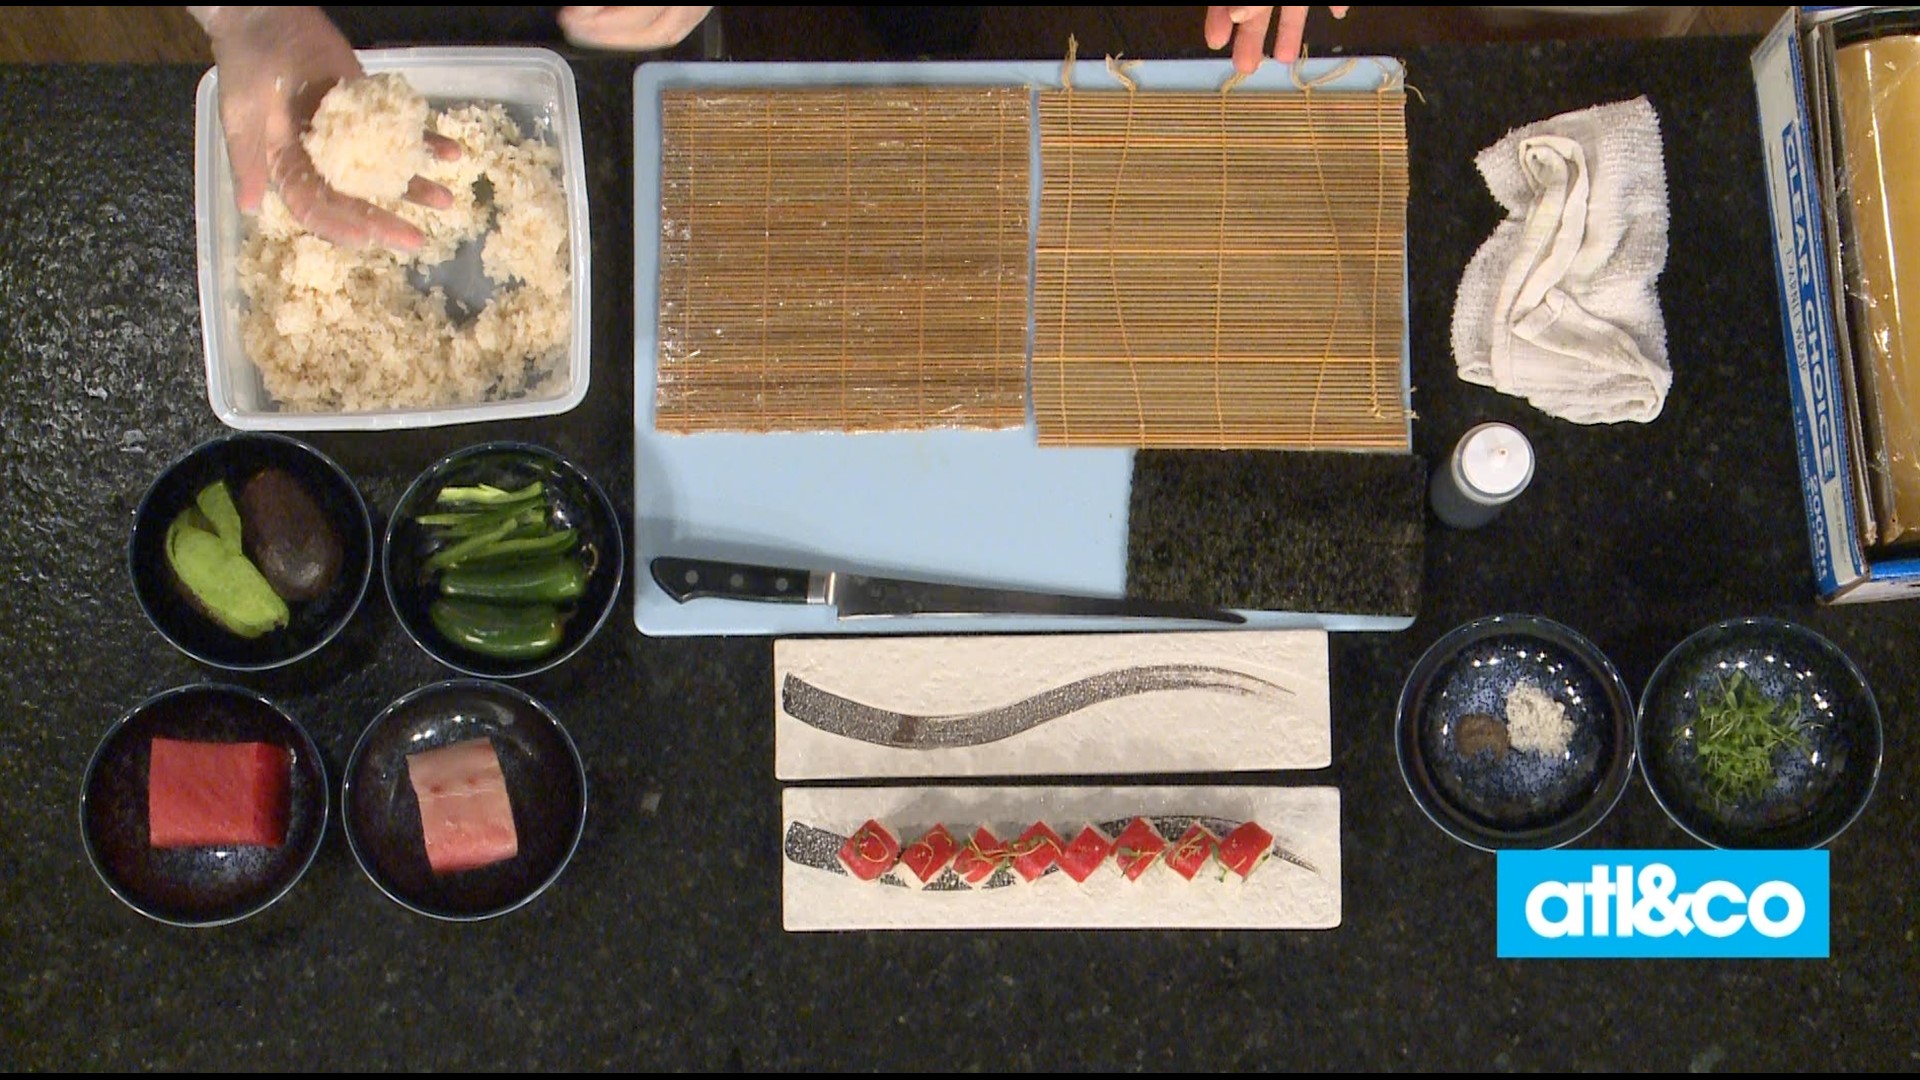 Chef Michael gives us an at home sushi lesson this morning!